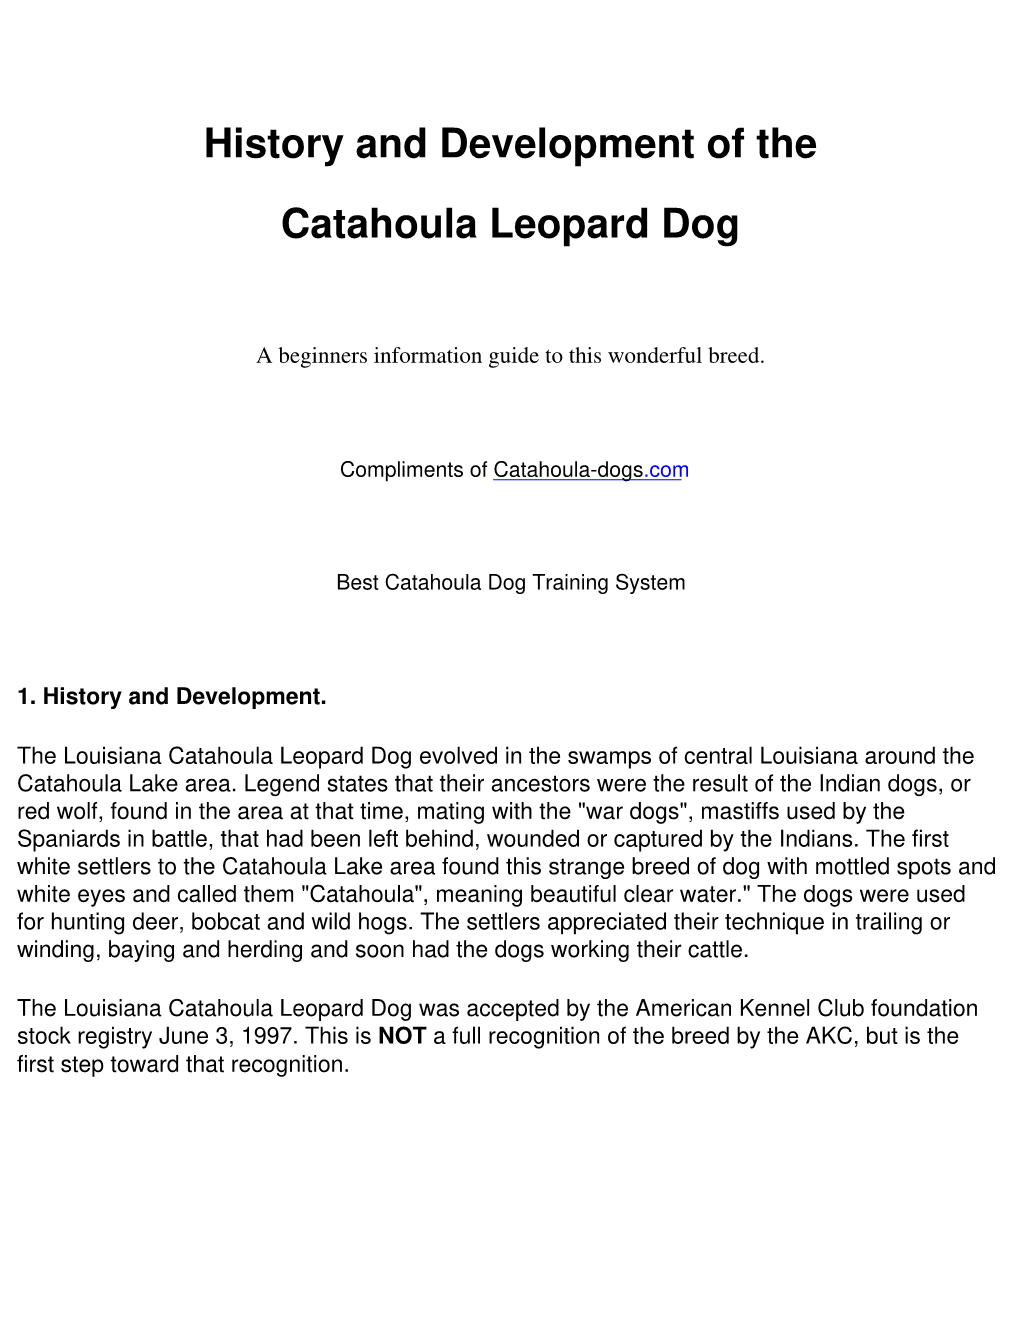 History and Development of the Catahoula Leopard Dog